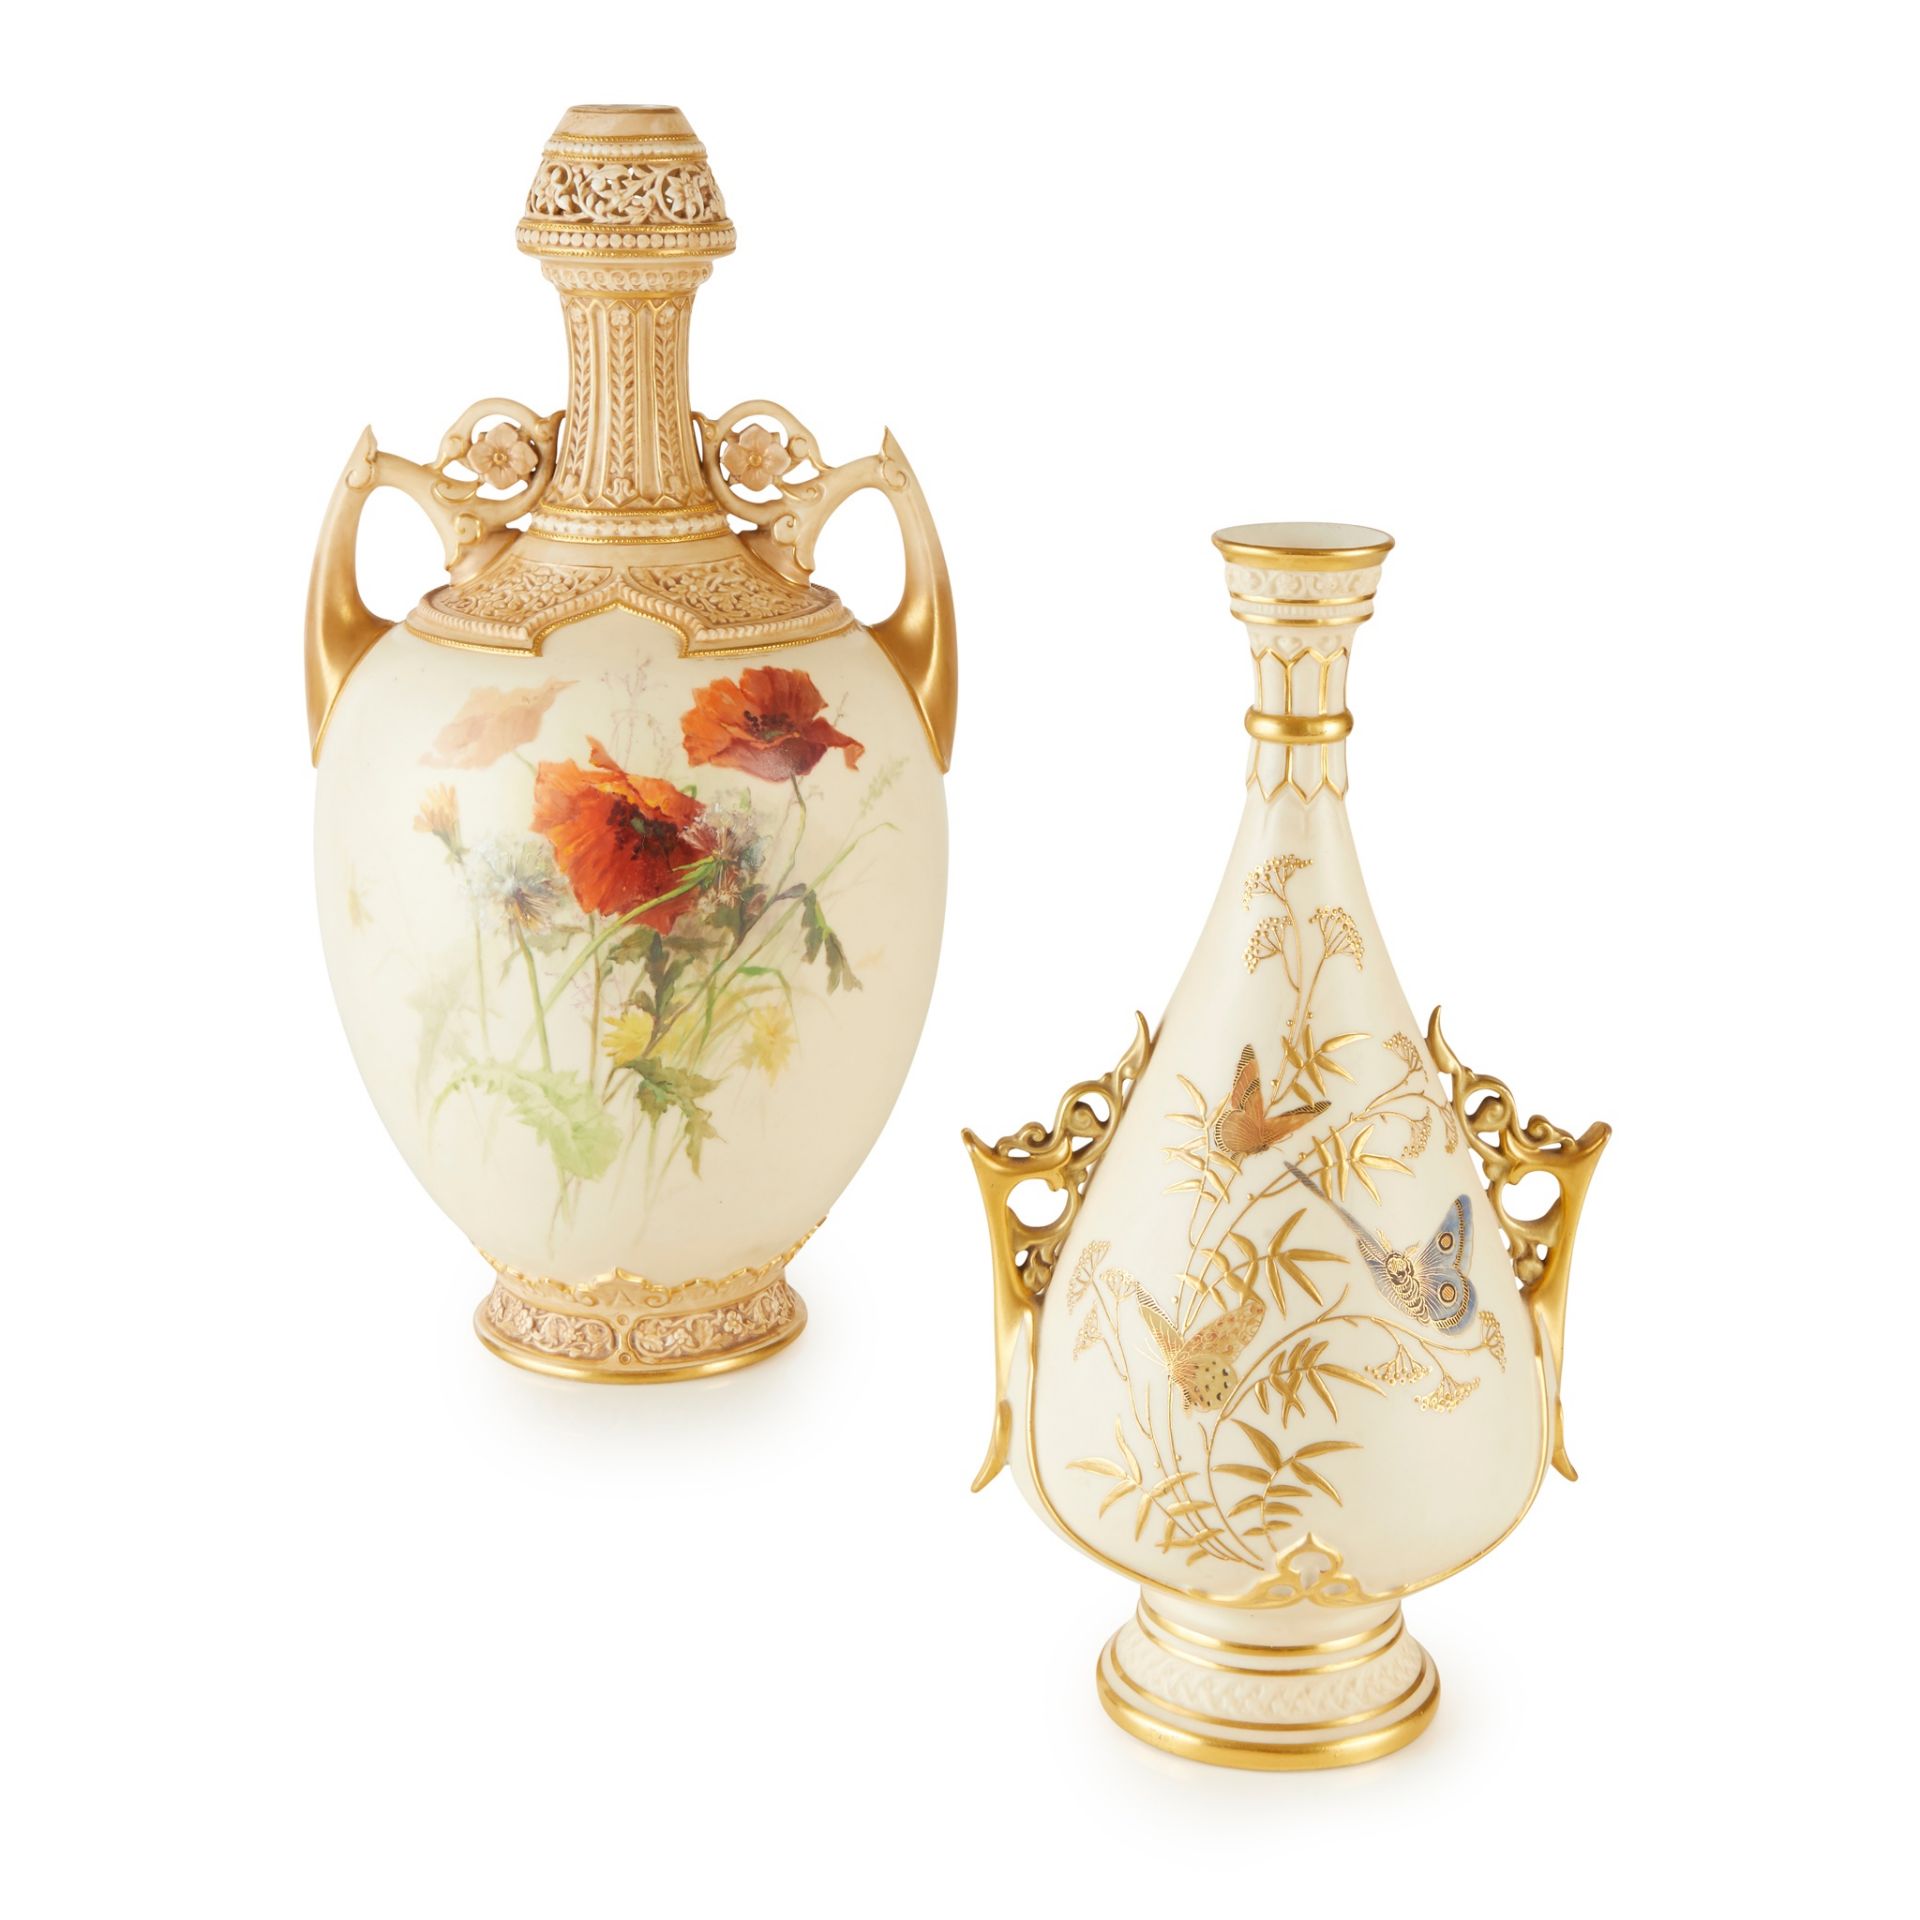 TWO WORCESTER PERSIAN STYLE PORCELAIN VASES 19TH CENTURY - Image 2 of 2